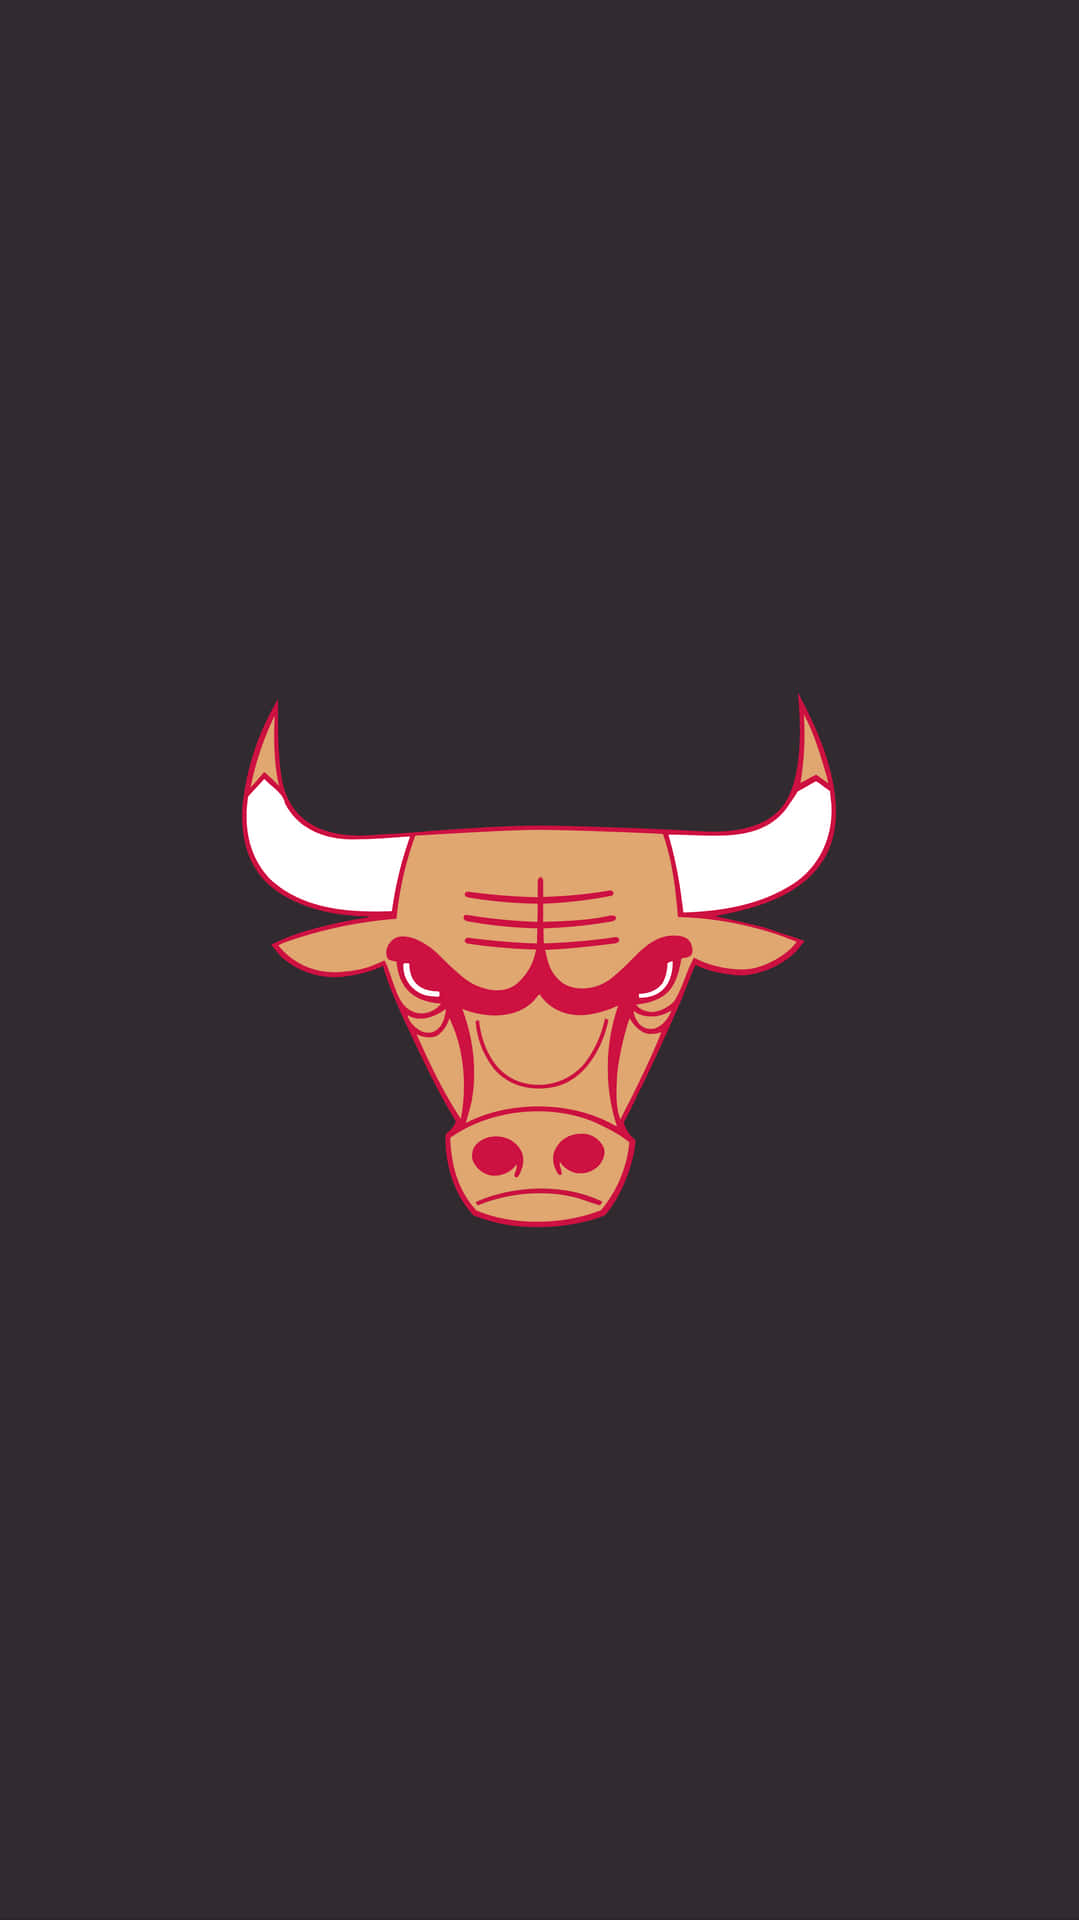 An Iphone with an Iconic Chicago Bulls Logo Wallpaper